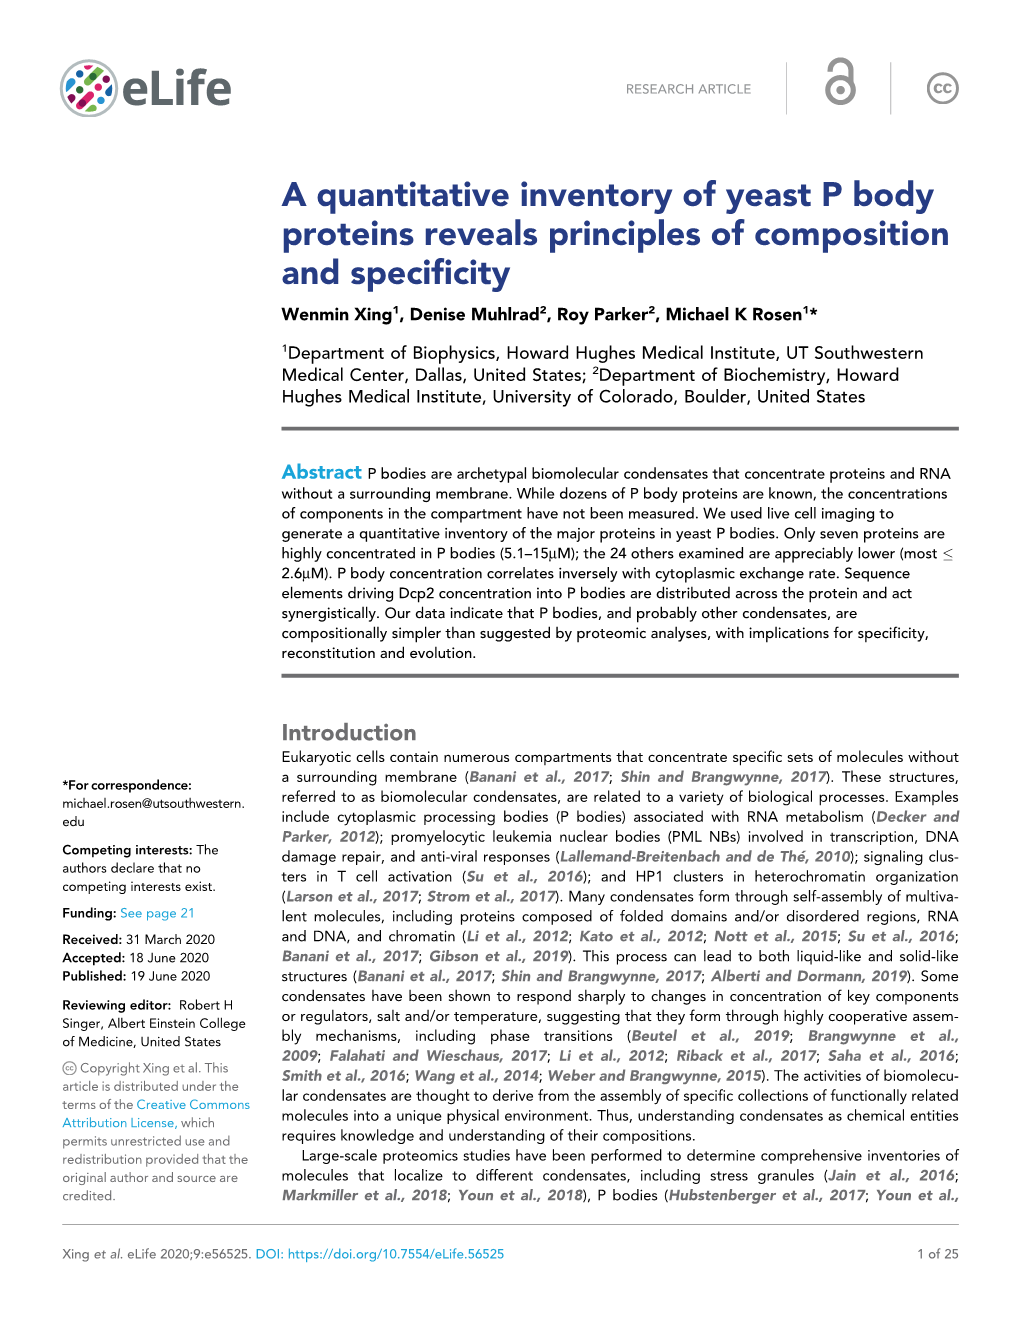 A Quantitative Inventory of Yeast P Body Proteins Reveals Principles of Composition and Specificity Wenmin Xing1, Denise Muhlrad2, Roy Parker2, Michael K Rosen1*